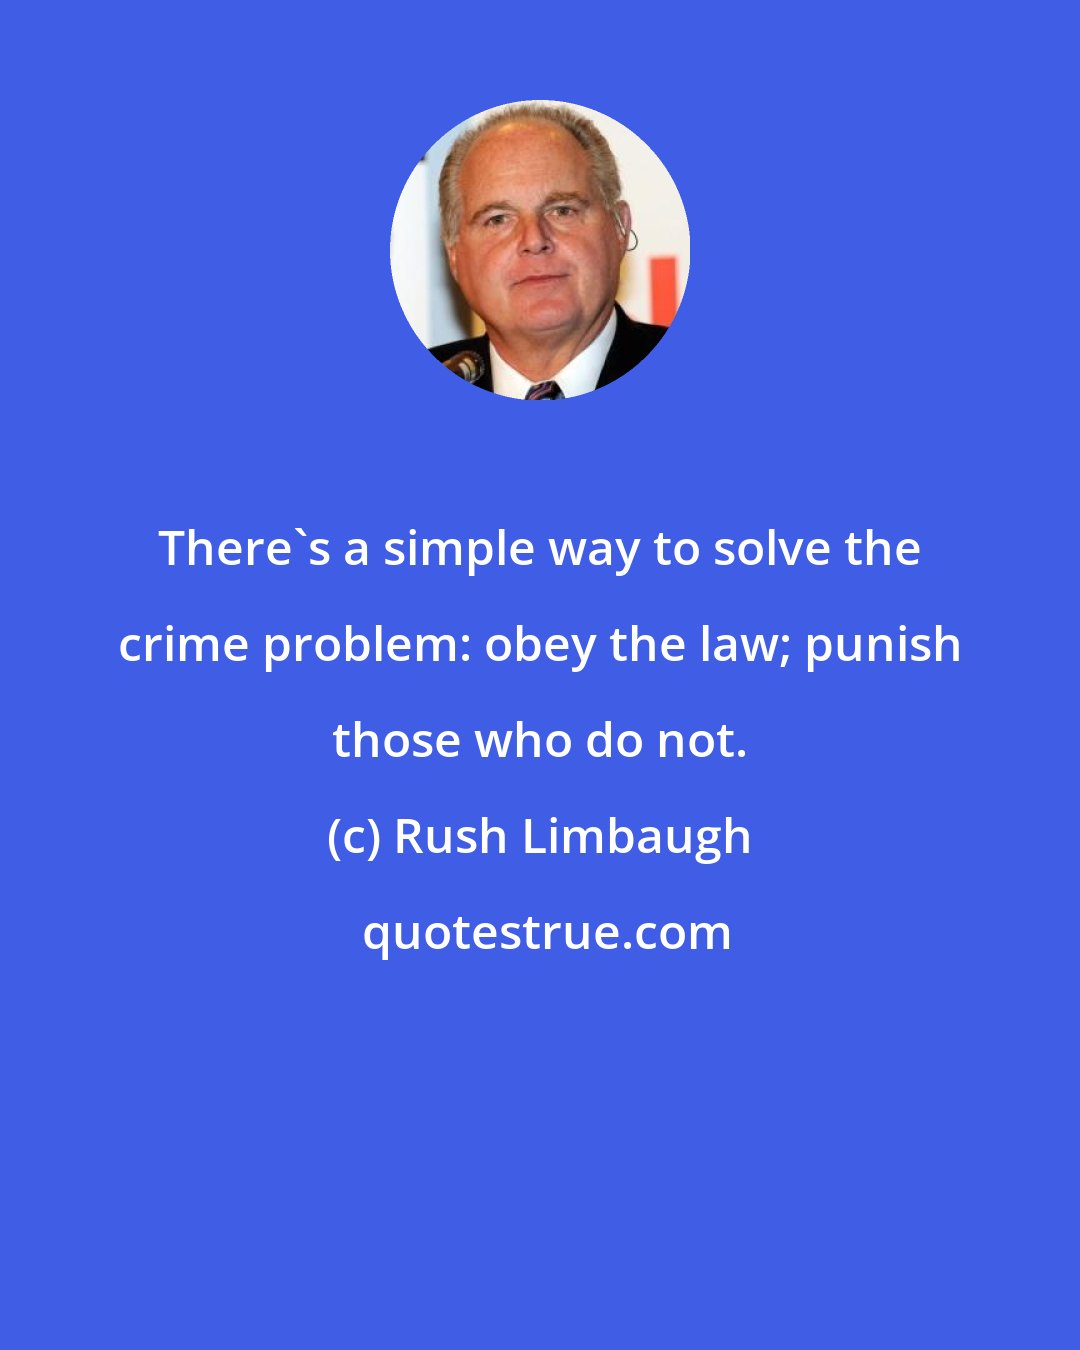 Rush Limbaugh: There's a simple way to solve the crime problem: obey the law; punish those who do not.